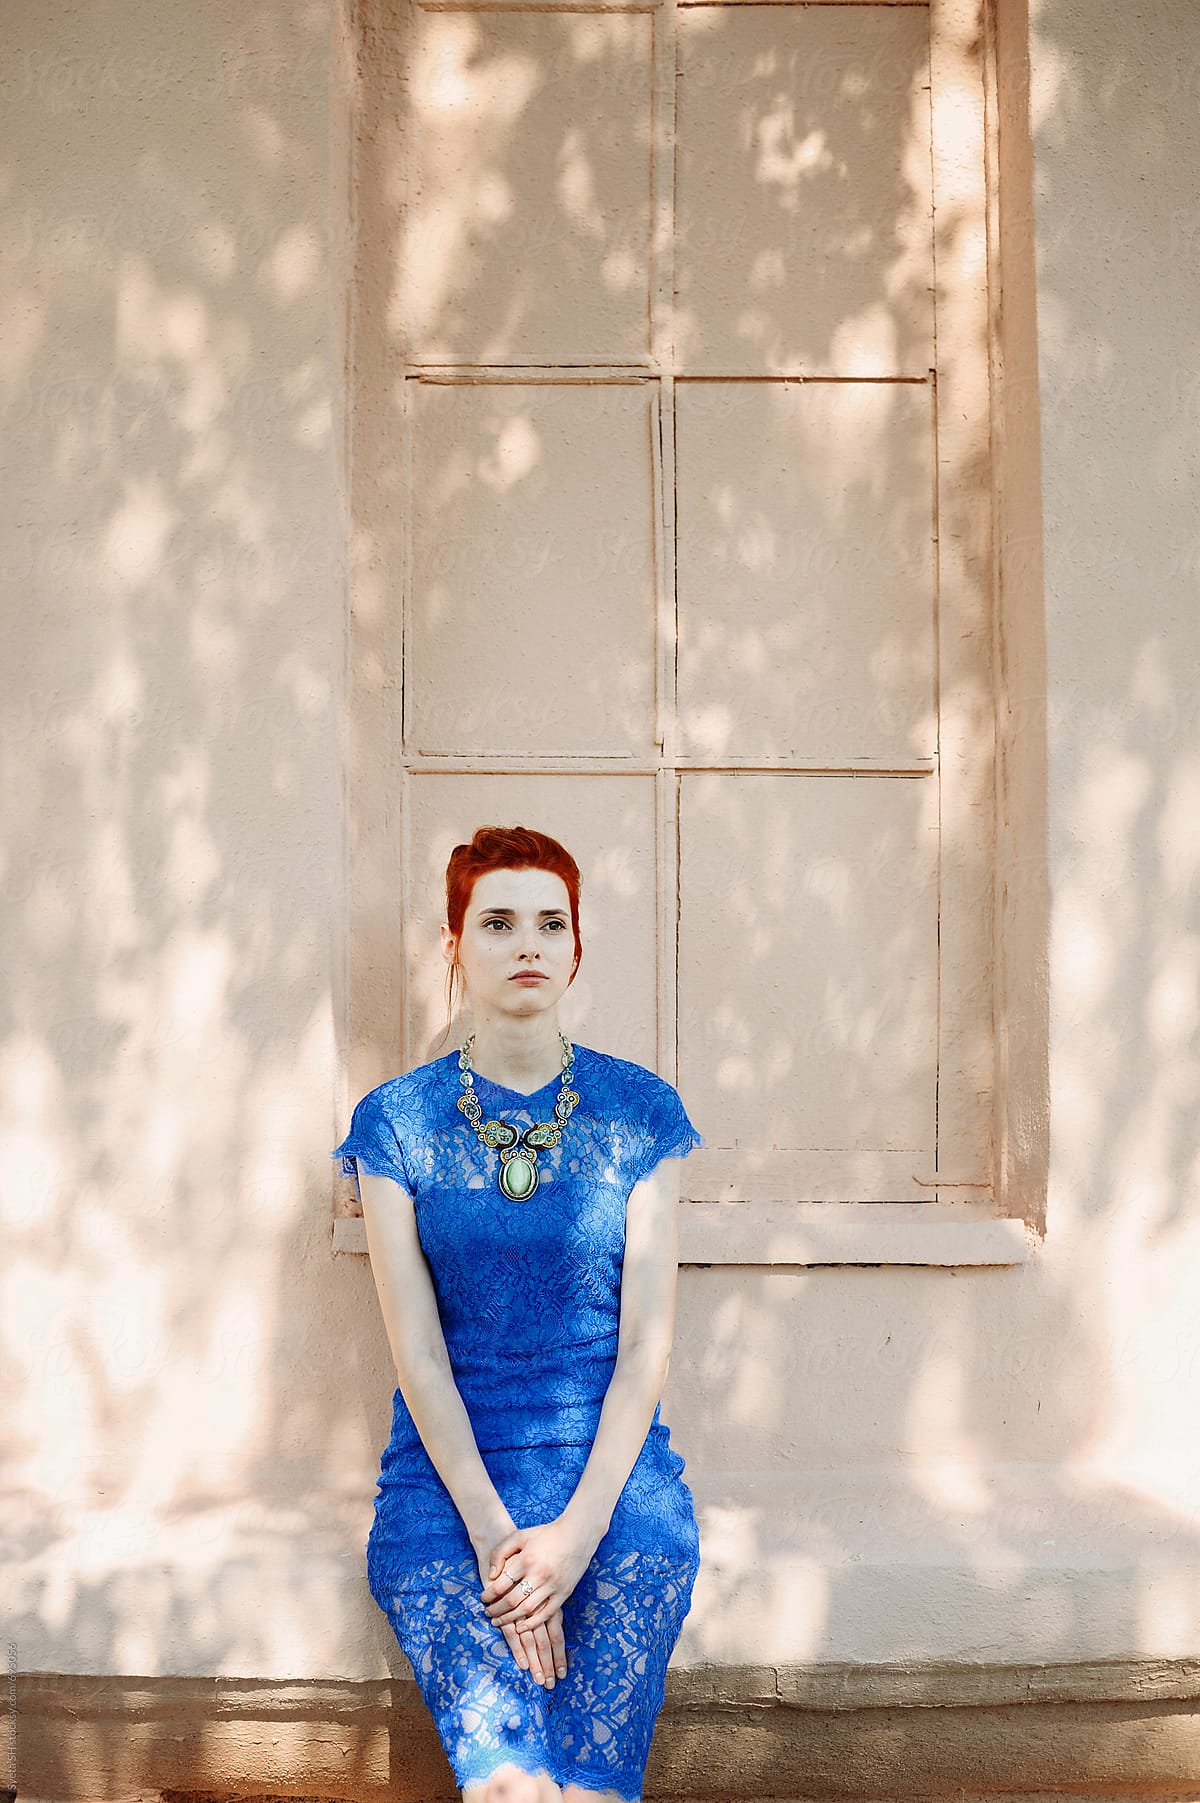 Red-haired girl in a blue dress